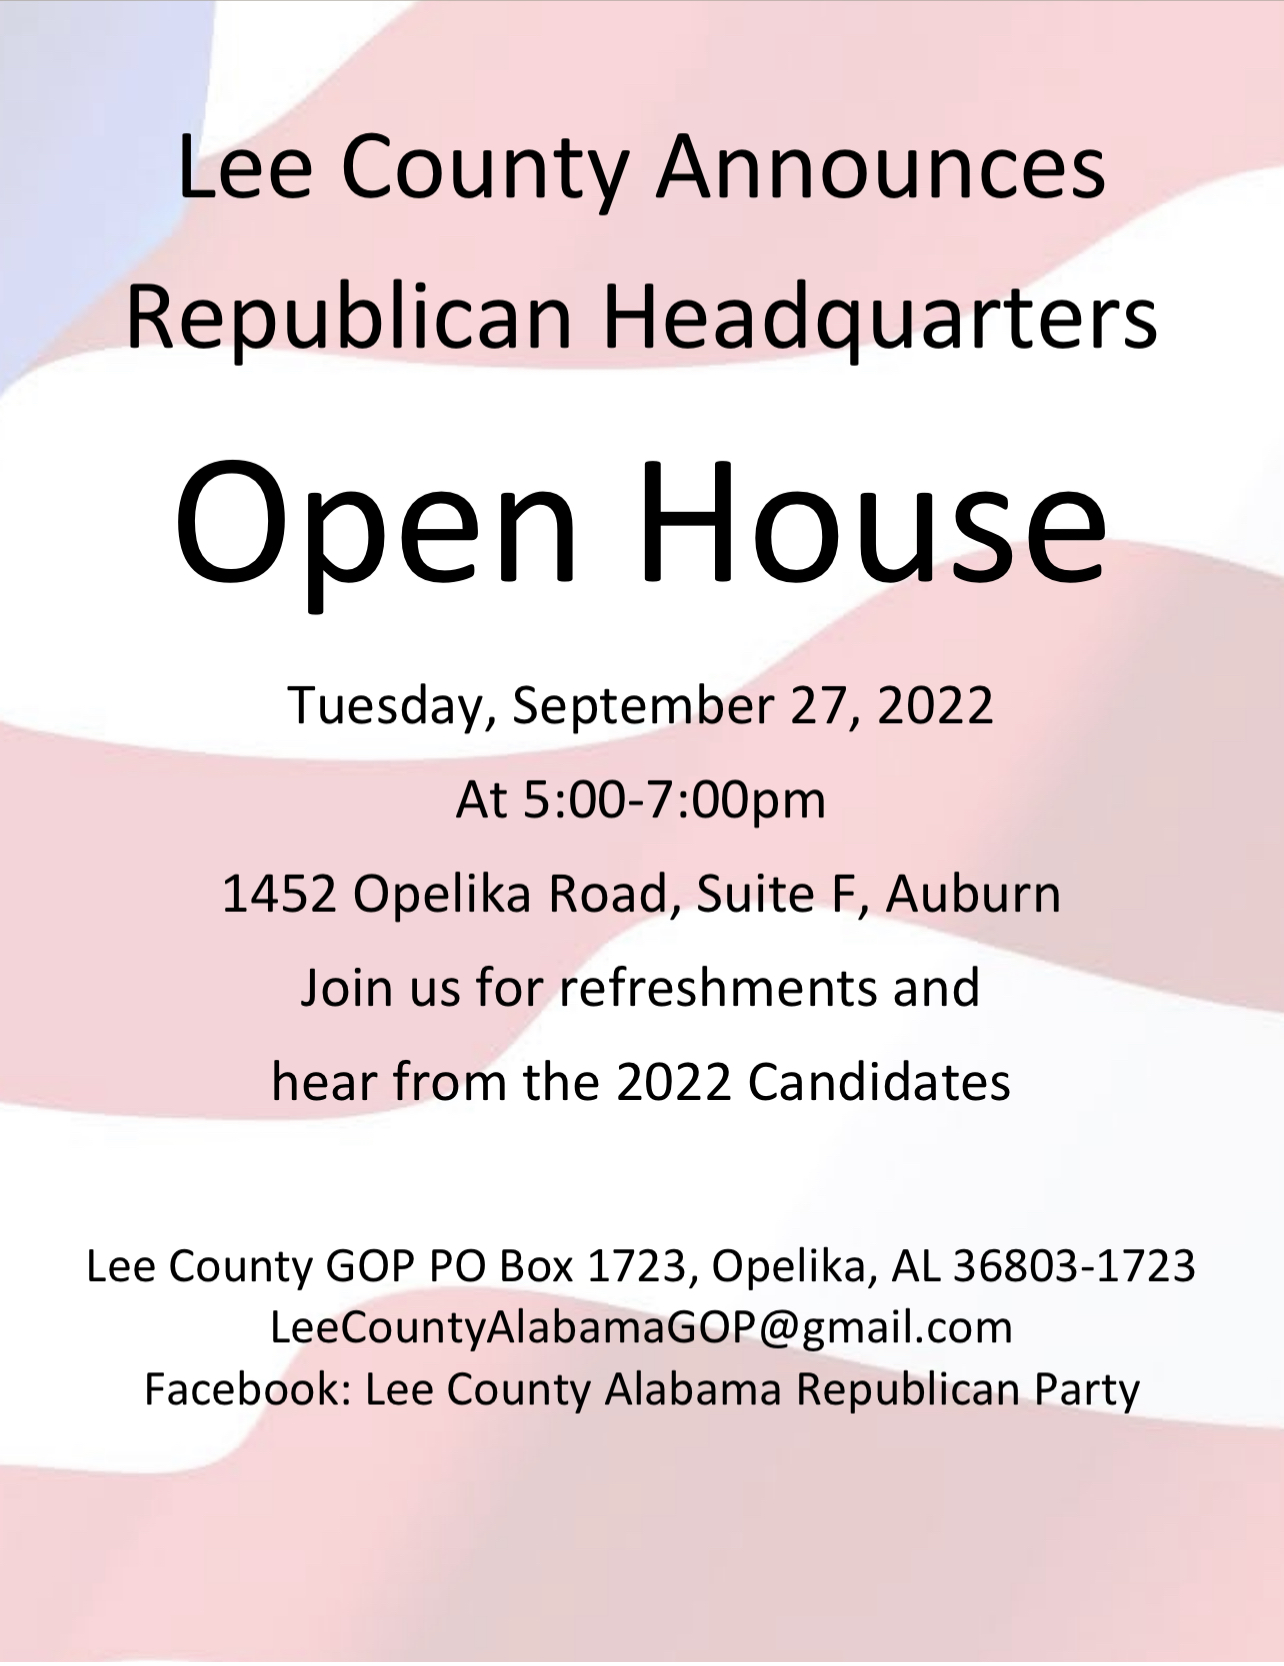 Lee County GOP Headquarters Open House - Alabama Republican Party